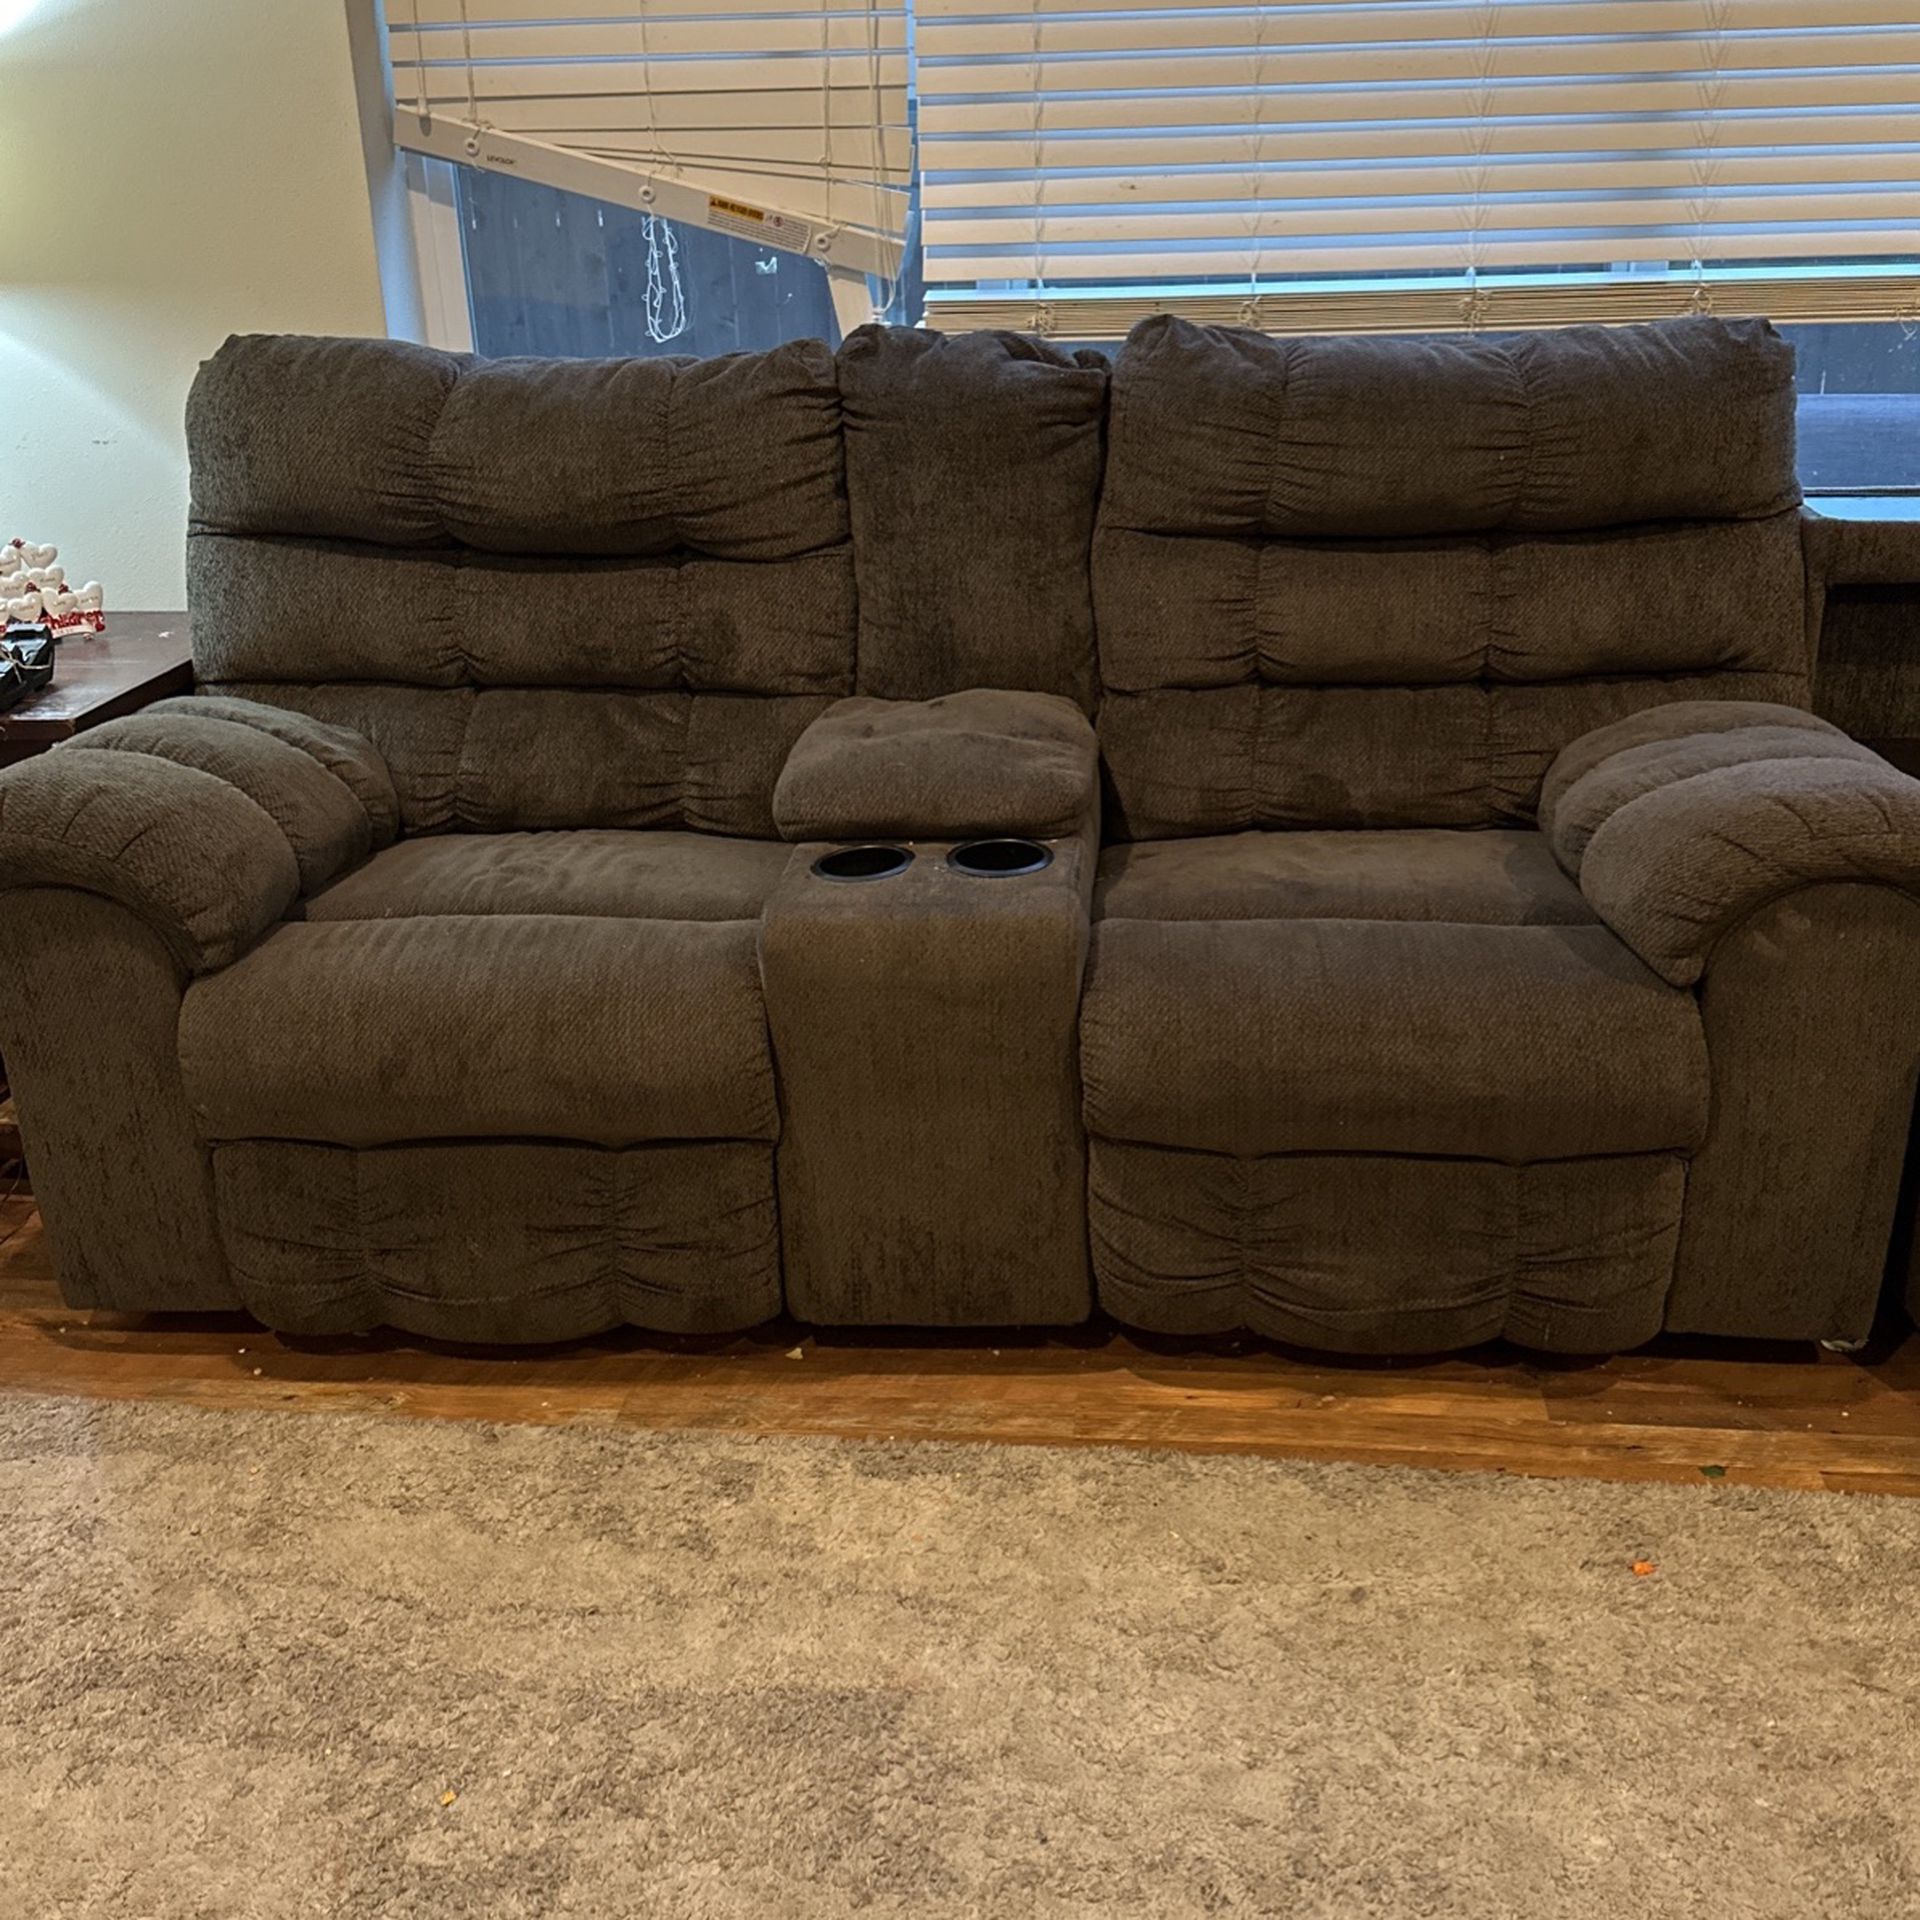 I Have To Let Go Of This Couch Because  I Will Not Have Room For It At New Place, It Does Need To  Be Cleaned Thats Why I’m Giving For A Lower Price 